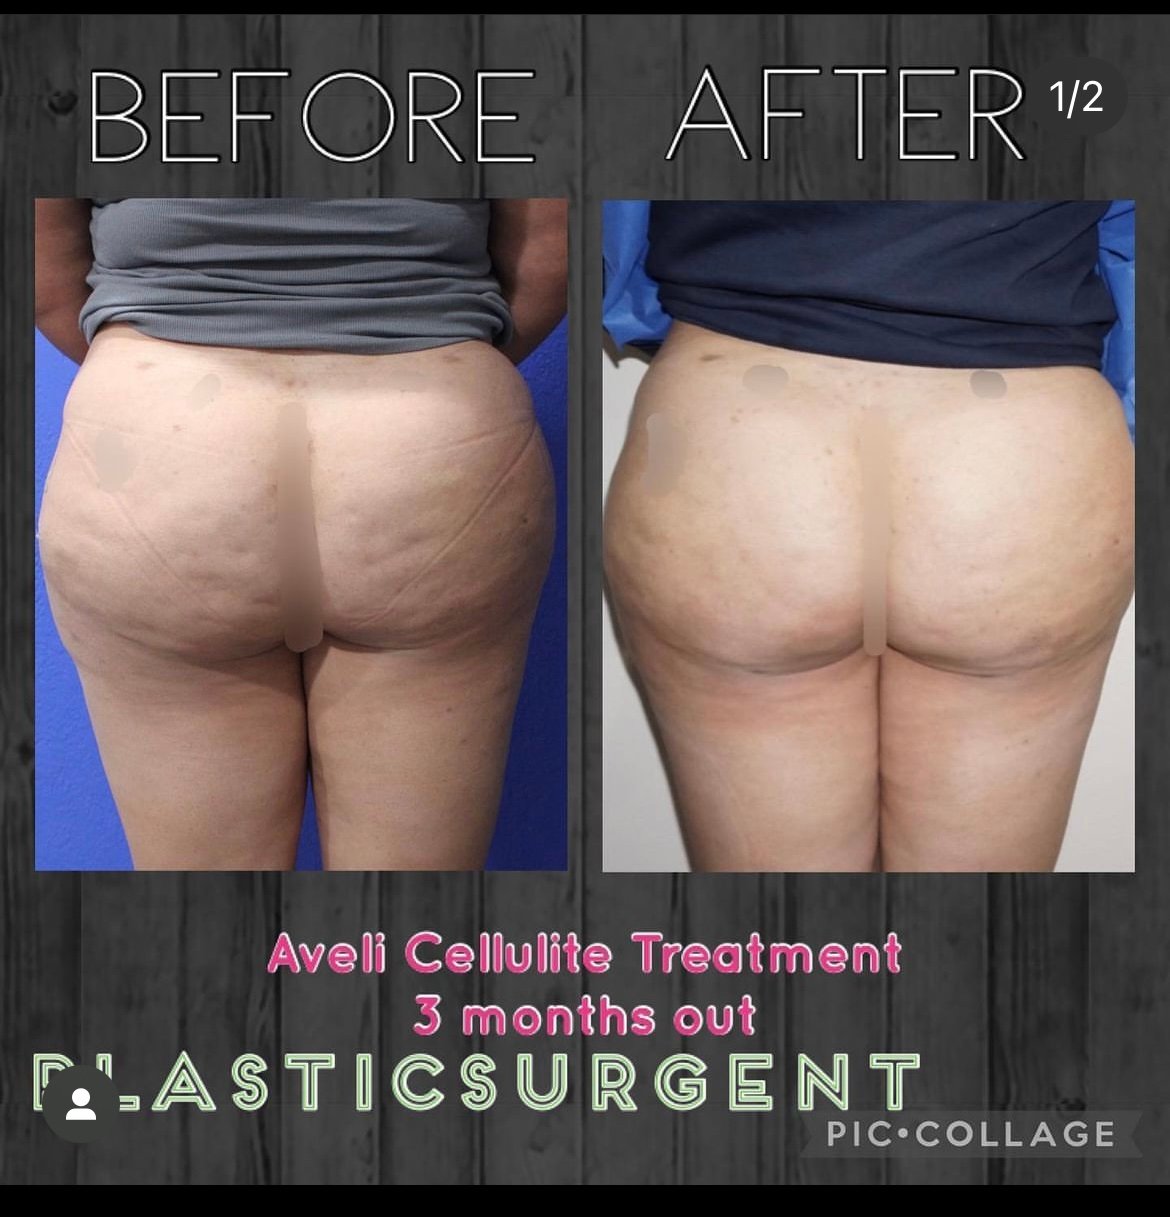 cellulite treatments that work